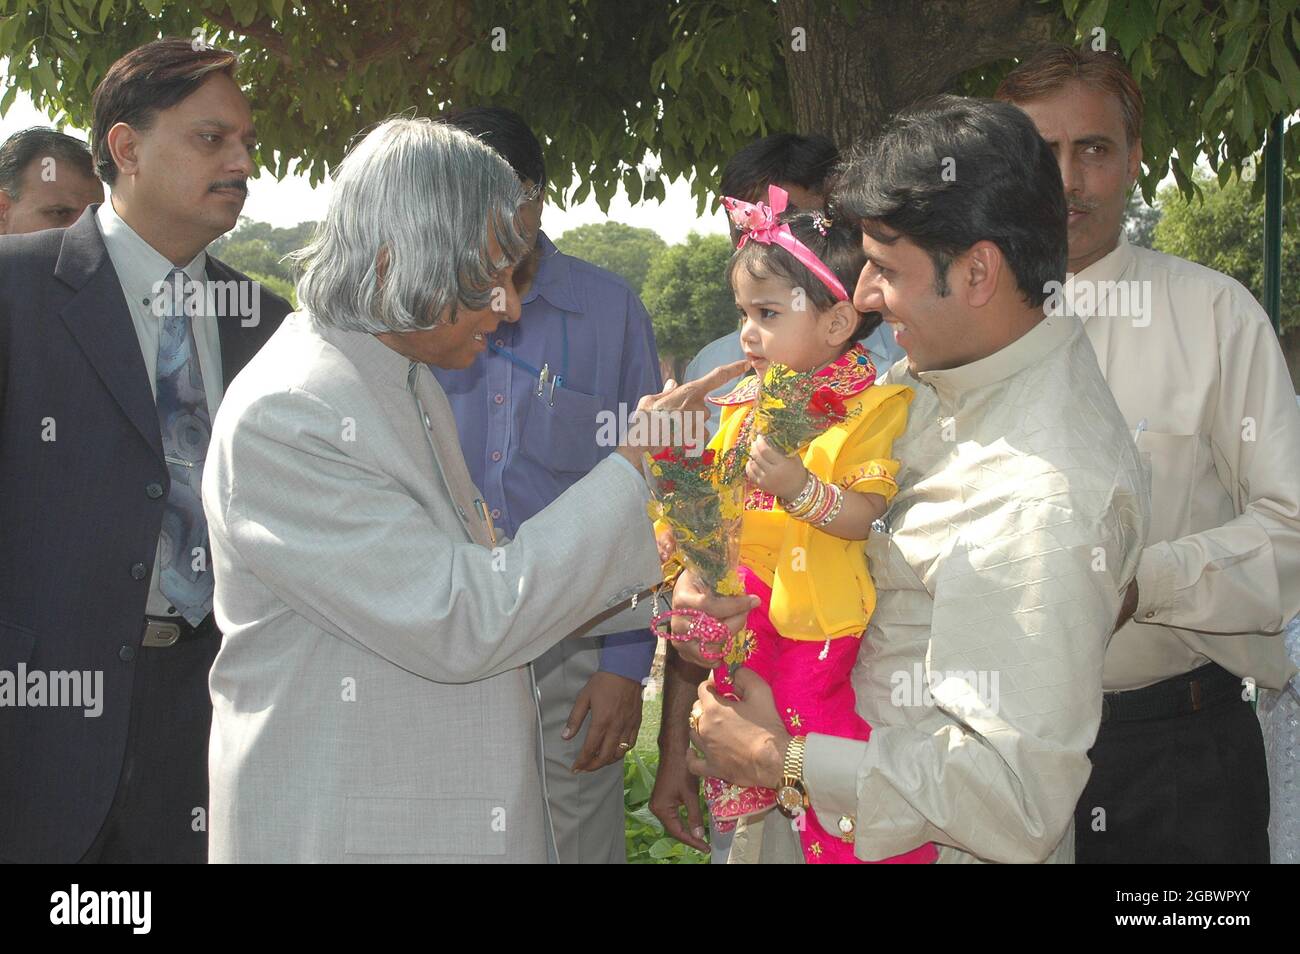 Indian President A.P.J. Abdul Kalam also known as the 'missile man' interacts with a child in Rashtrapati Bhawan (Presidential Palace) in New Delhi. P Stock Photo